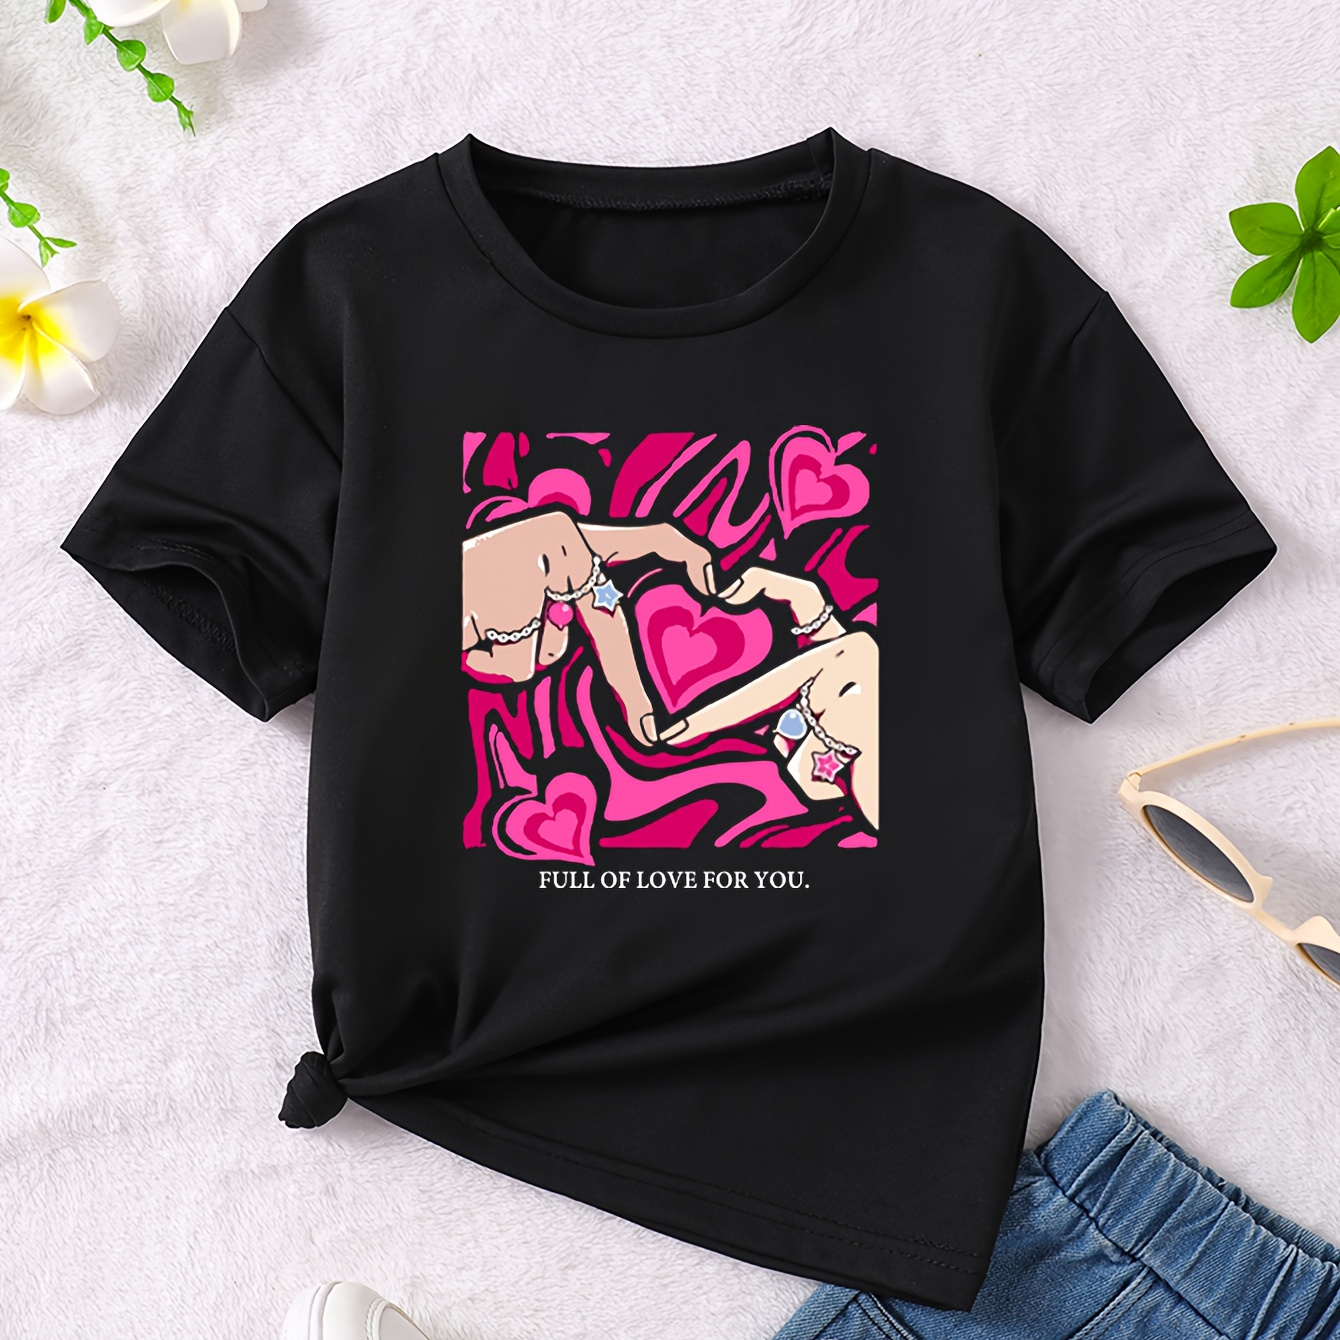 

Girls Casual Love Heart Graphic T-shirt, Black Short Sleeve Tee With "full Of Love For You" Design For Girls